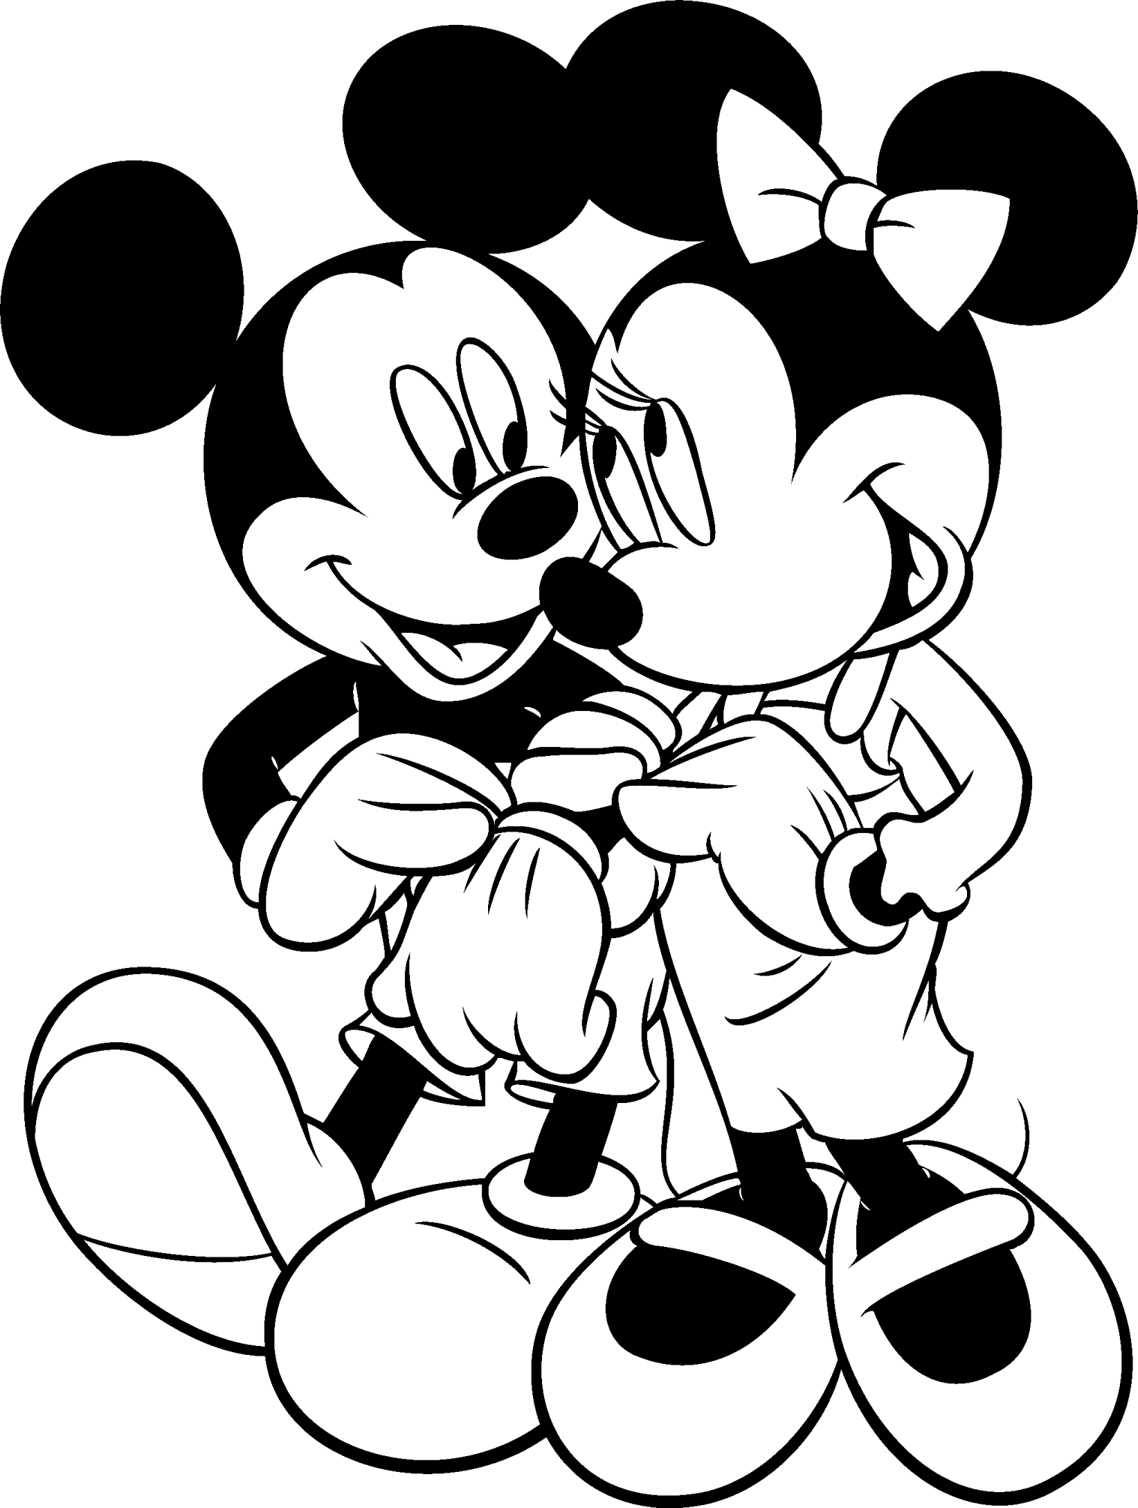 Full Page Coloring Pages Disney – 20 fresh ideas for coloring ...